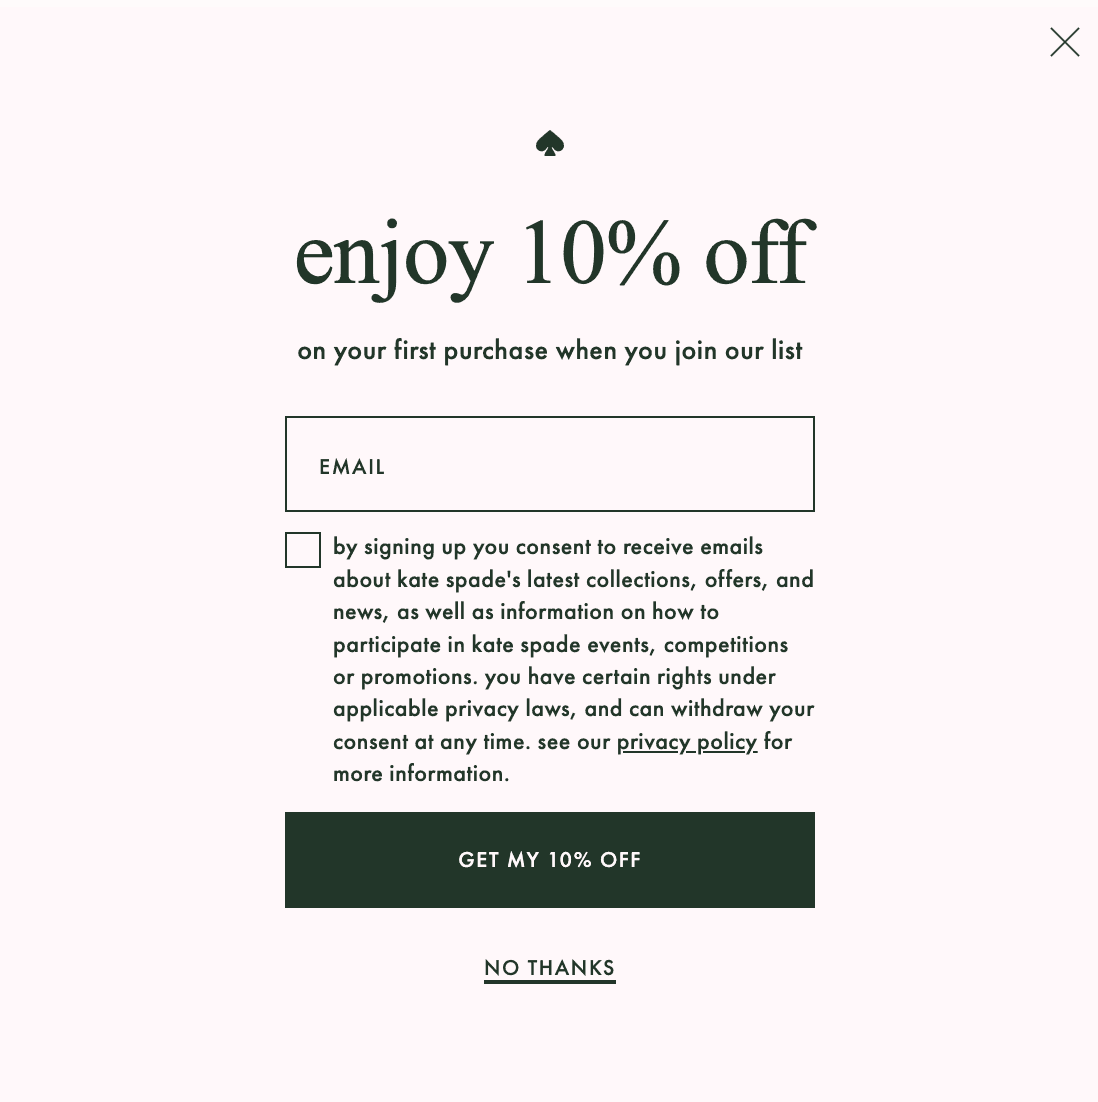 Kate Spade enjoy 10% off when signing up for email list